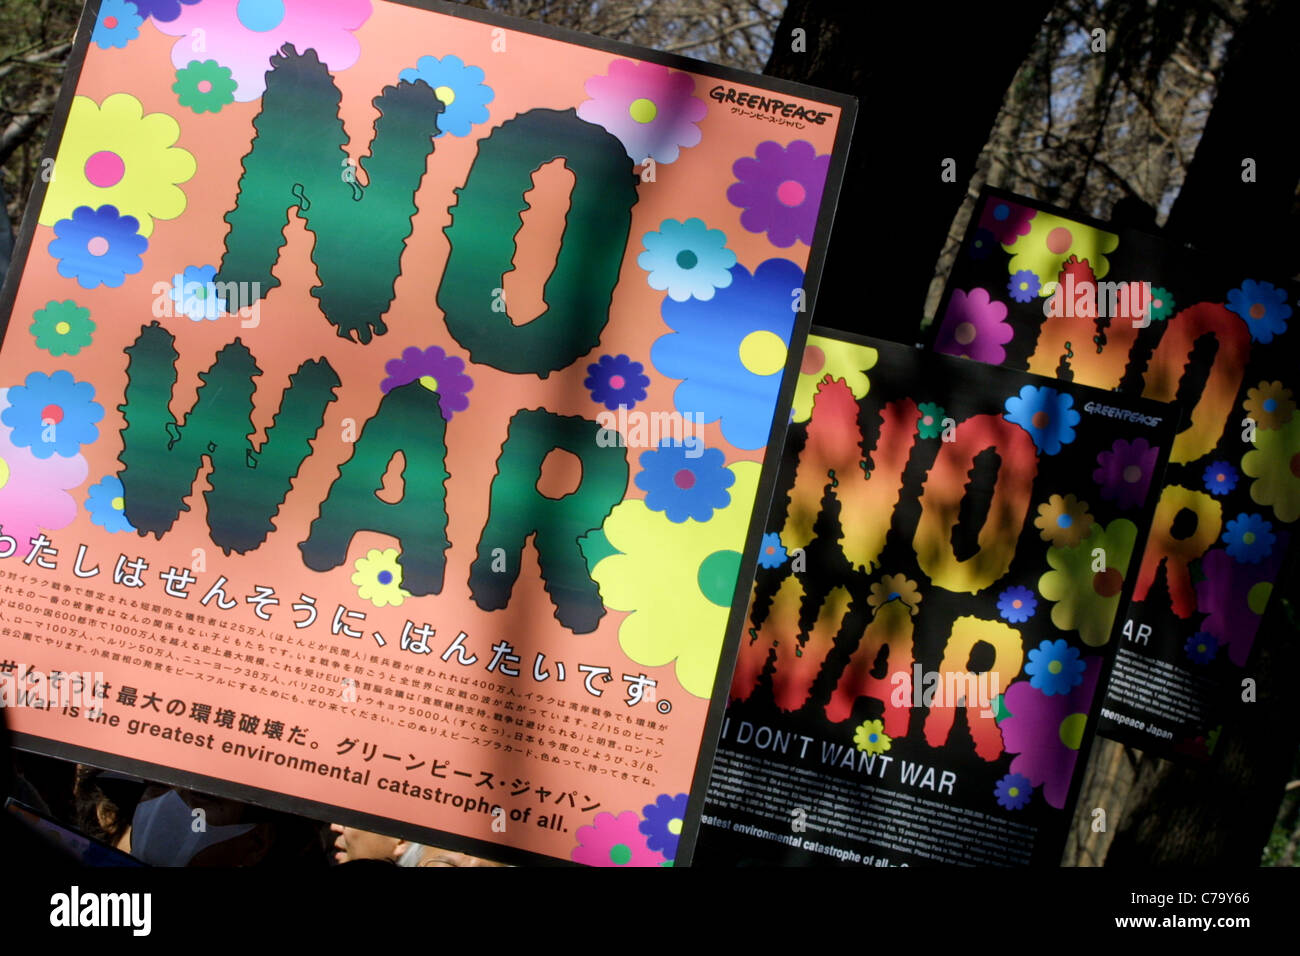 a No War (anti-Iraq war) demonstration in Tokyo, Japan, on 21st March 2003. Stock Photo